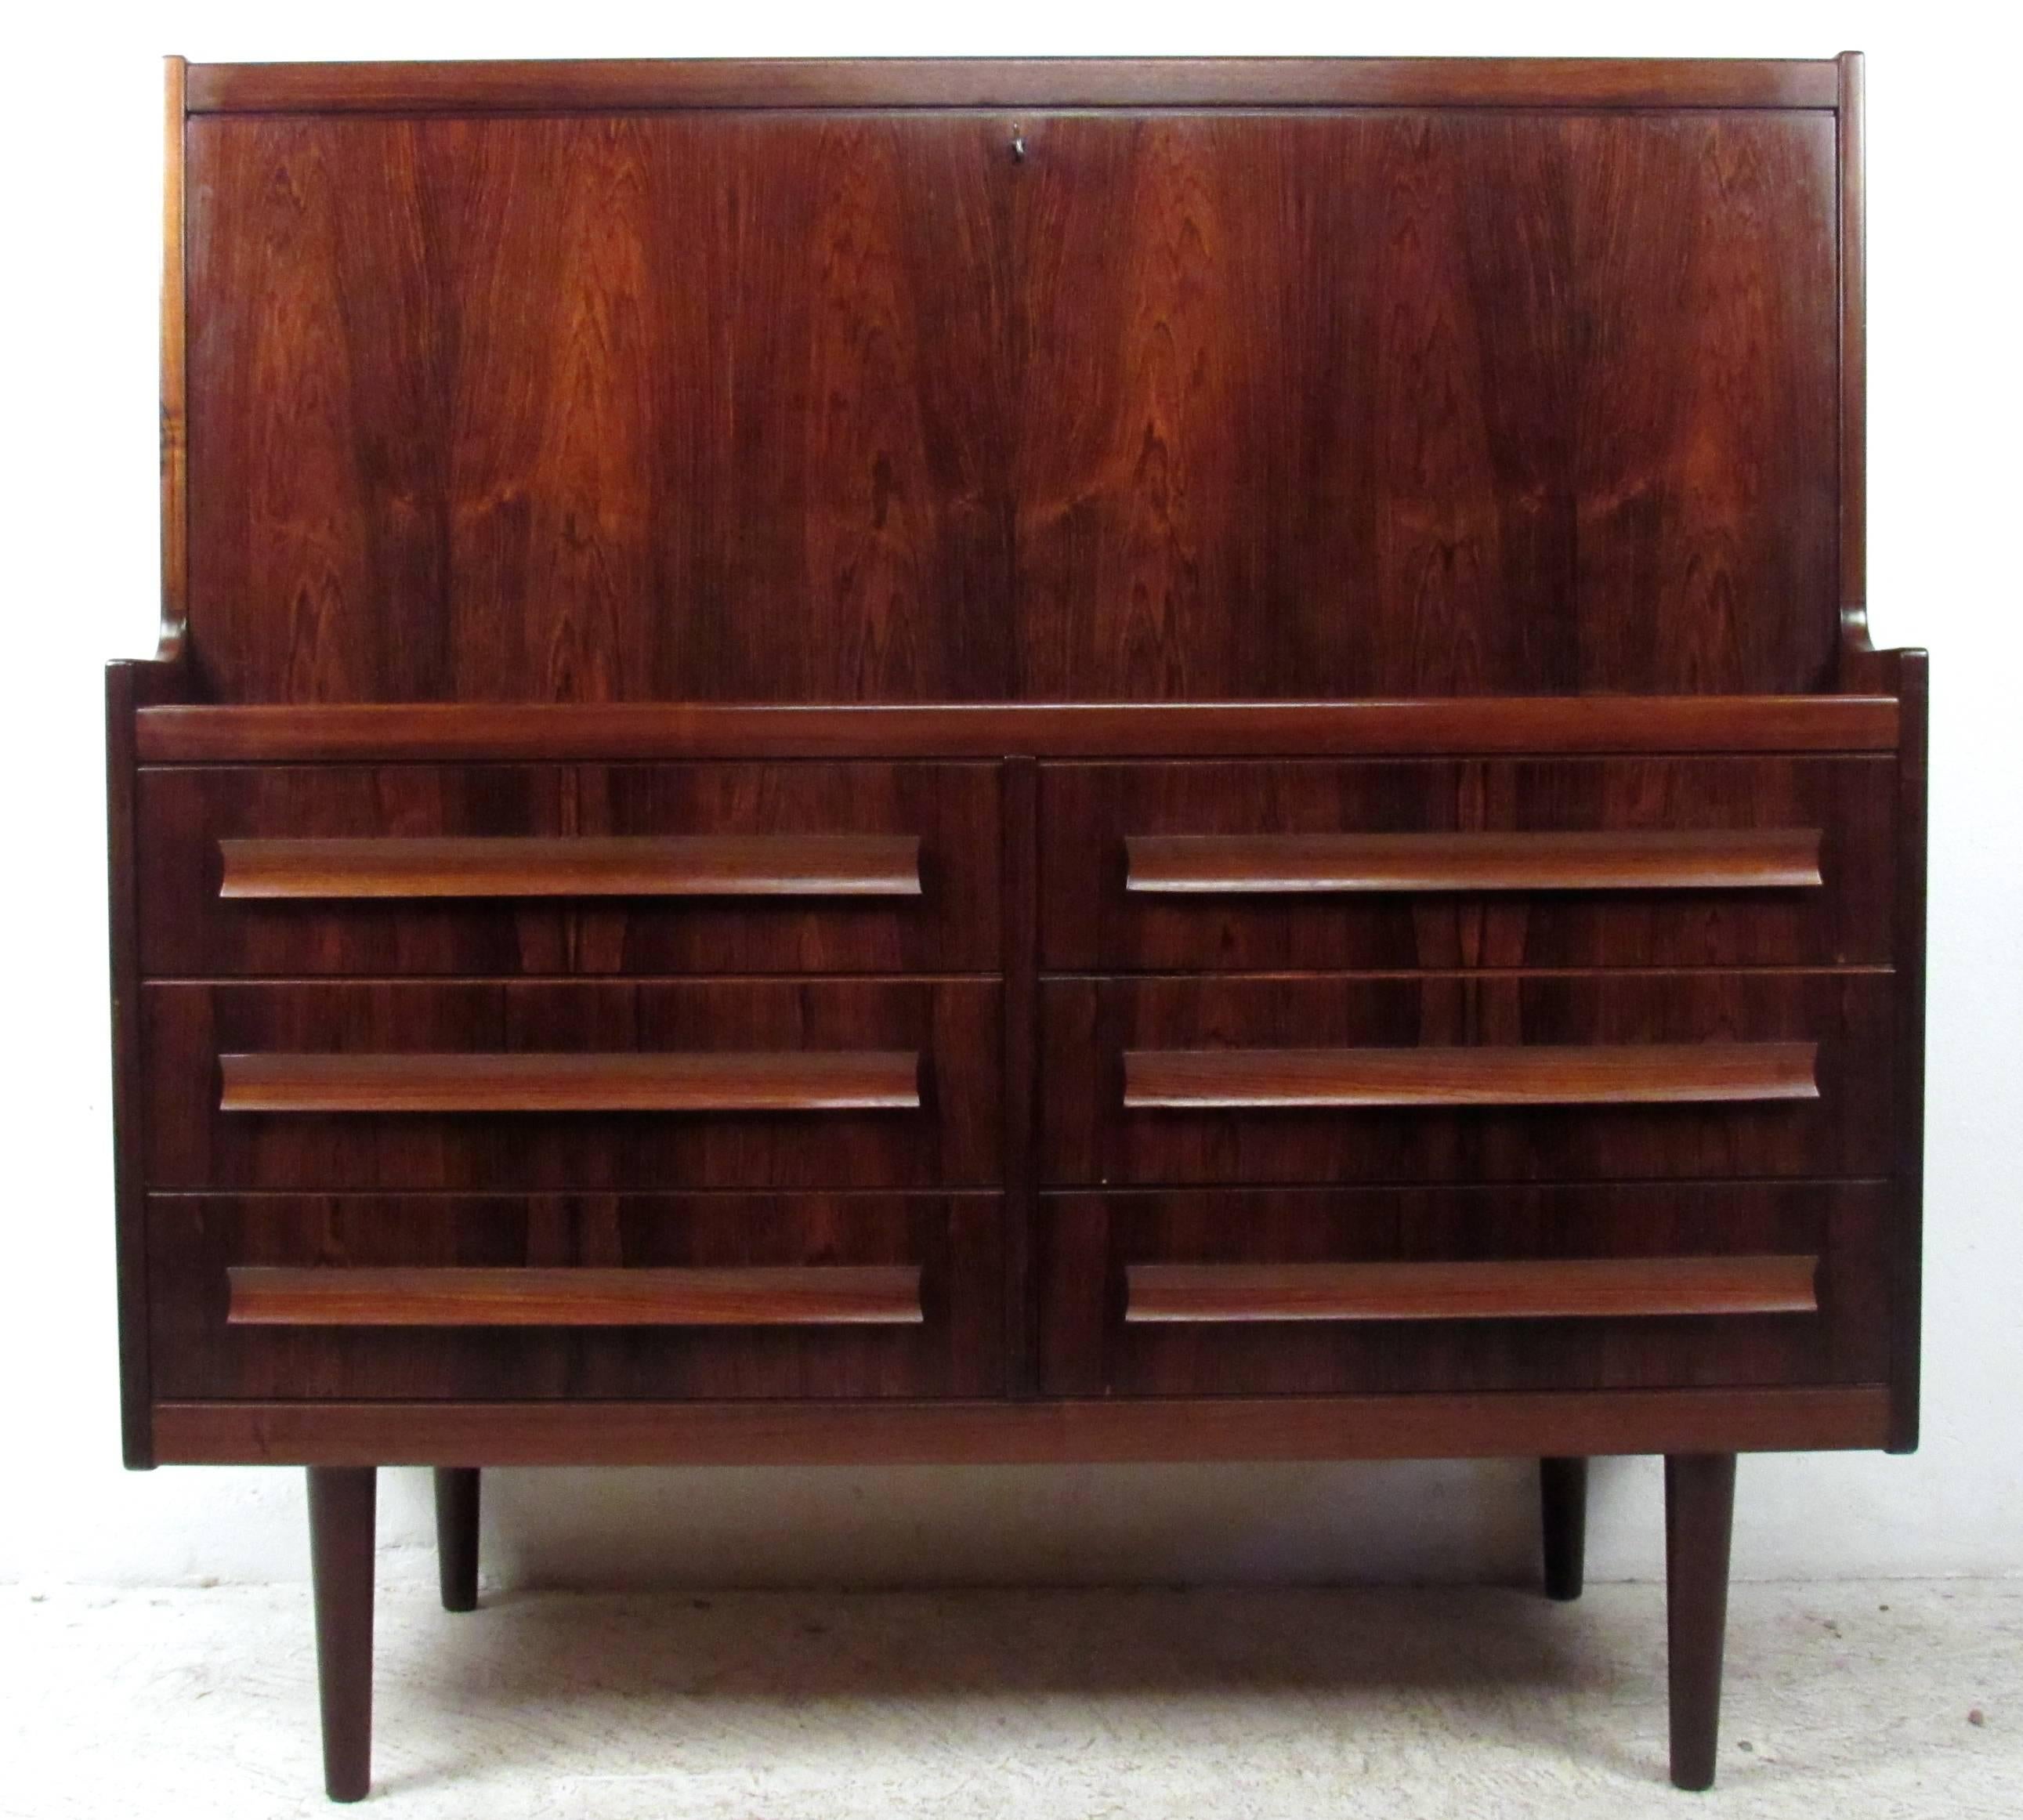 This beautiful vintage chatol features a rich rosewood finish, an optimal layout for organizational storage, and a spacious drop front work space. Unique drawer pulls, tapered legs, and a wide frame add to the design of the piece. Please confirm